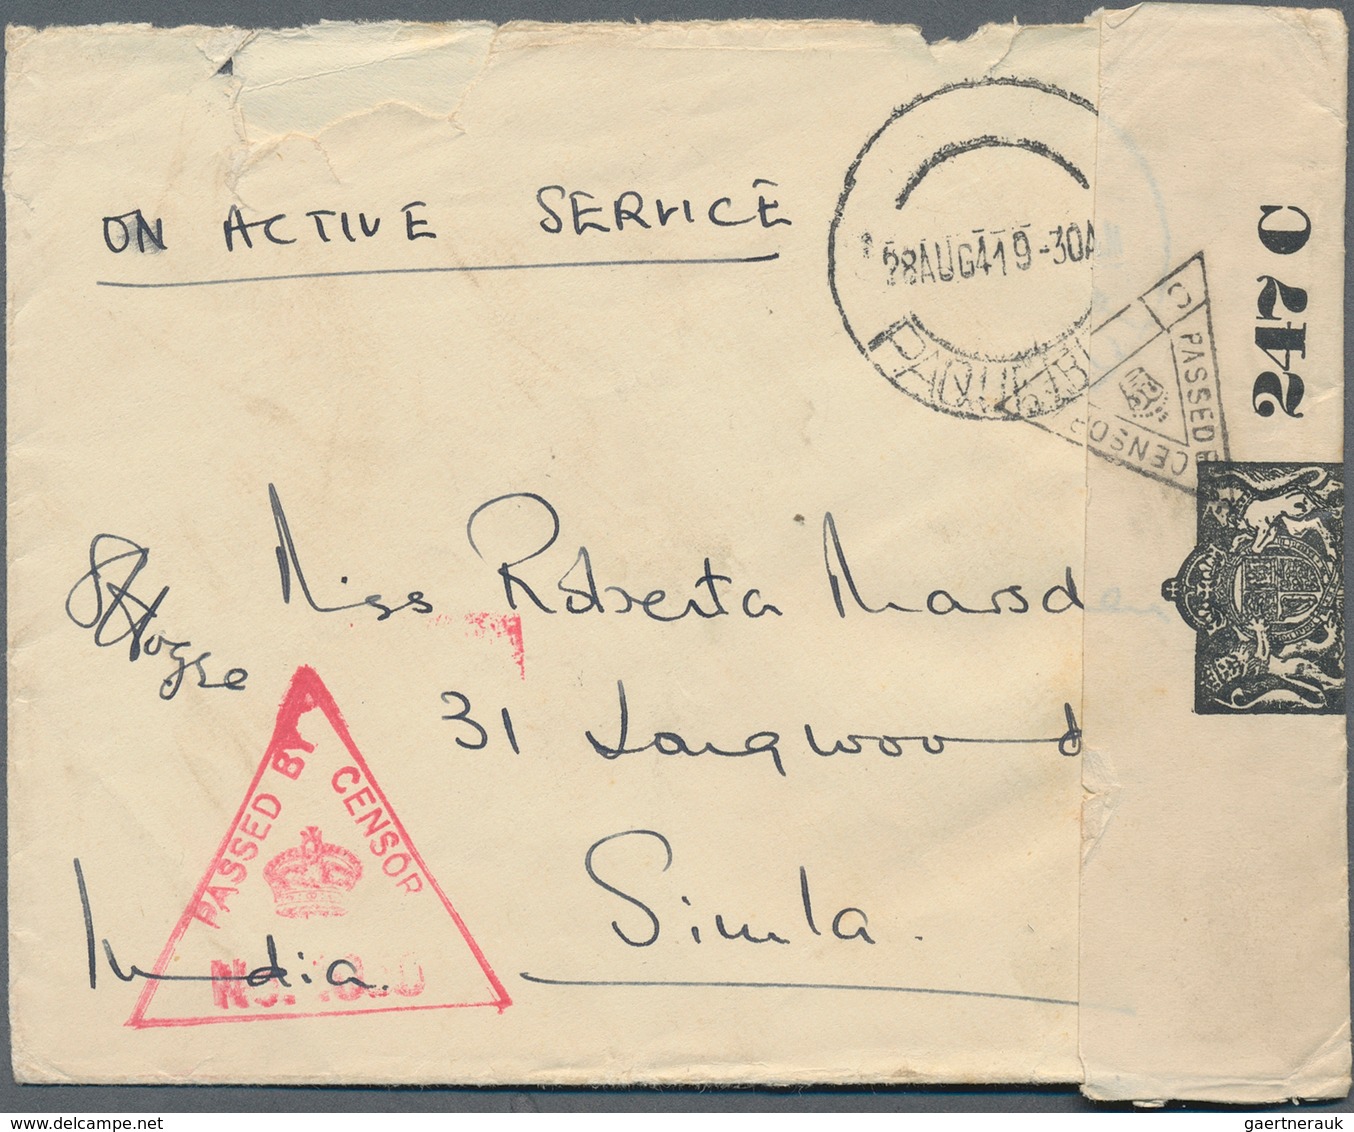 Indien: 1917/47, censored mails group, 28 covers inc. mail from Iraq (2) Madagascar, "naval censor l